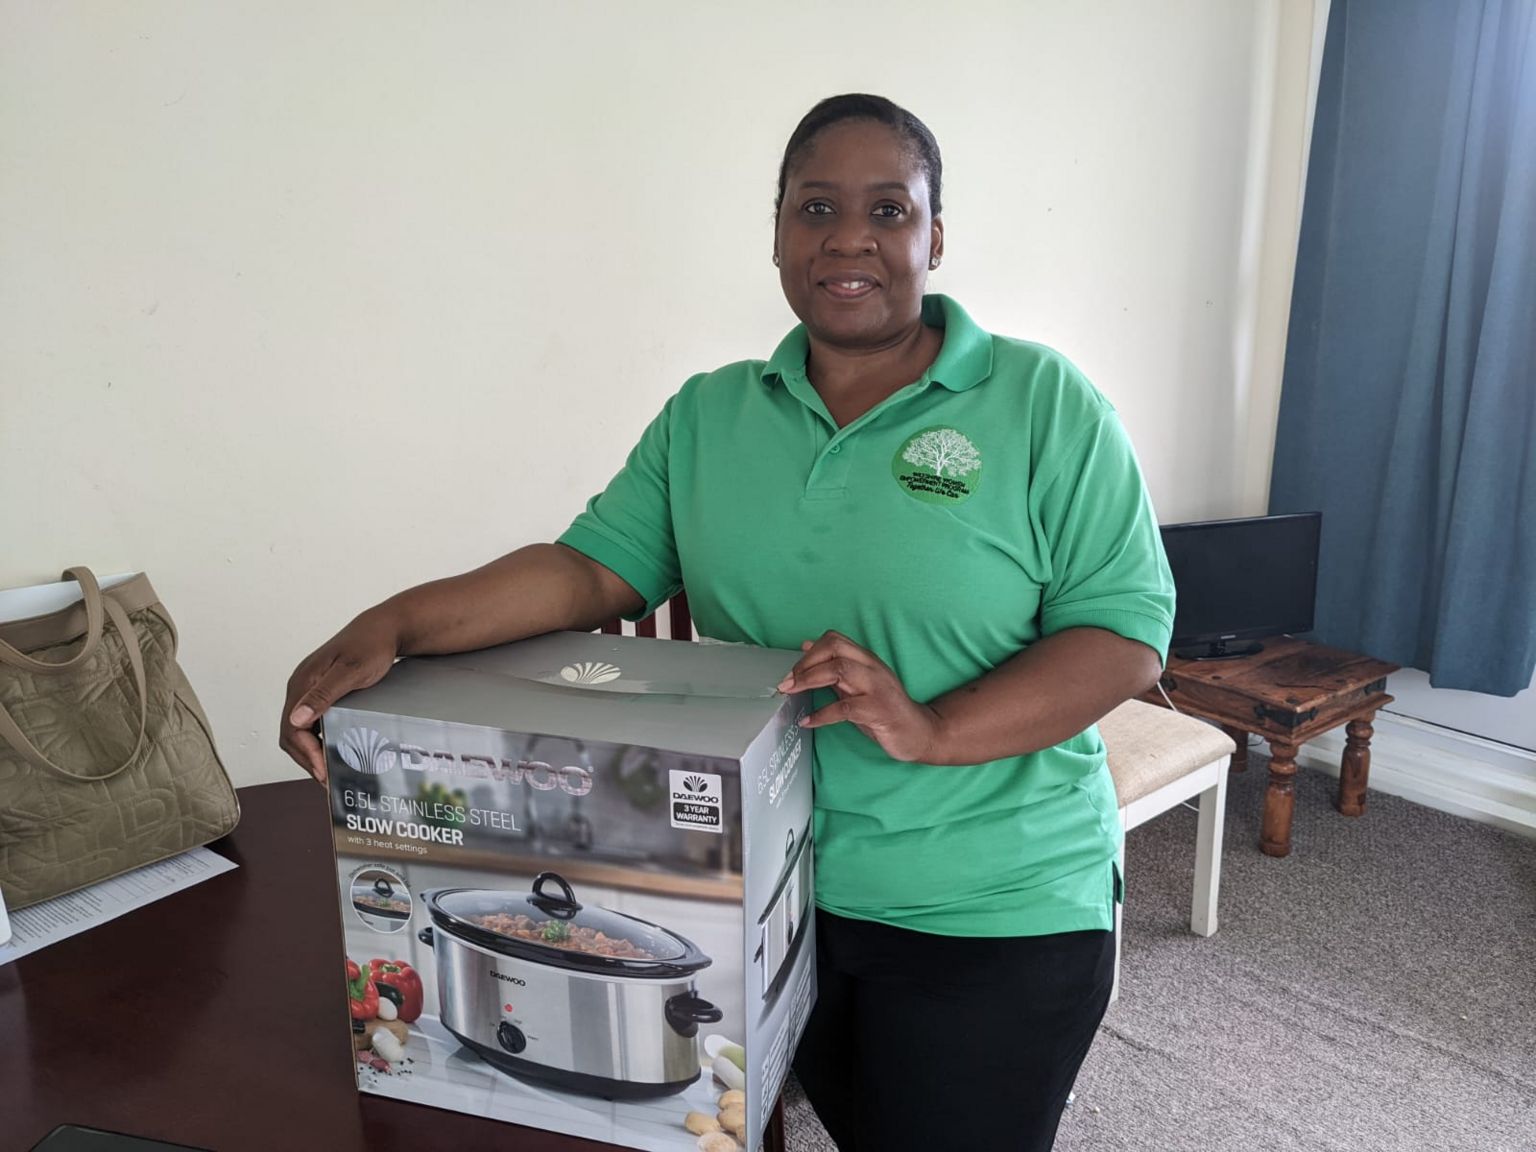 Thula Ndebele holding slow cookers in boxes